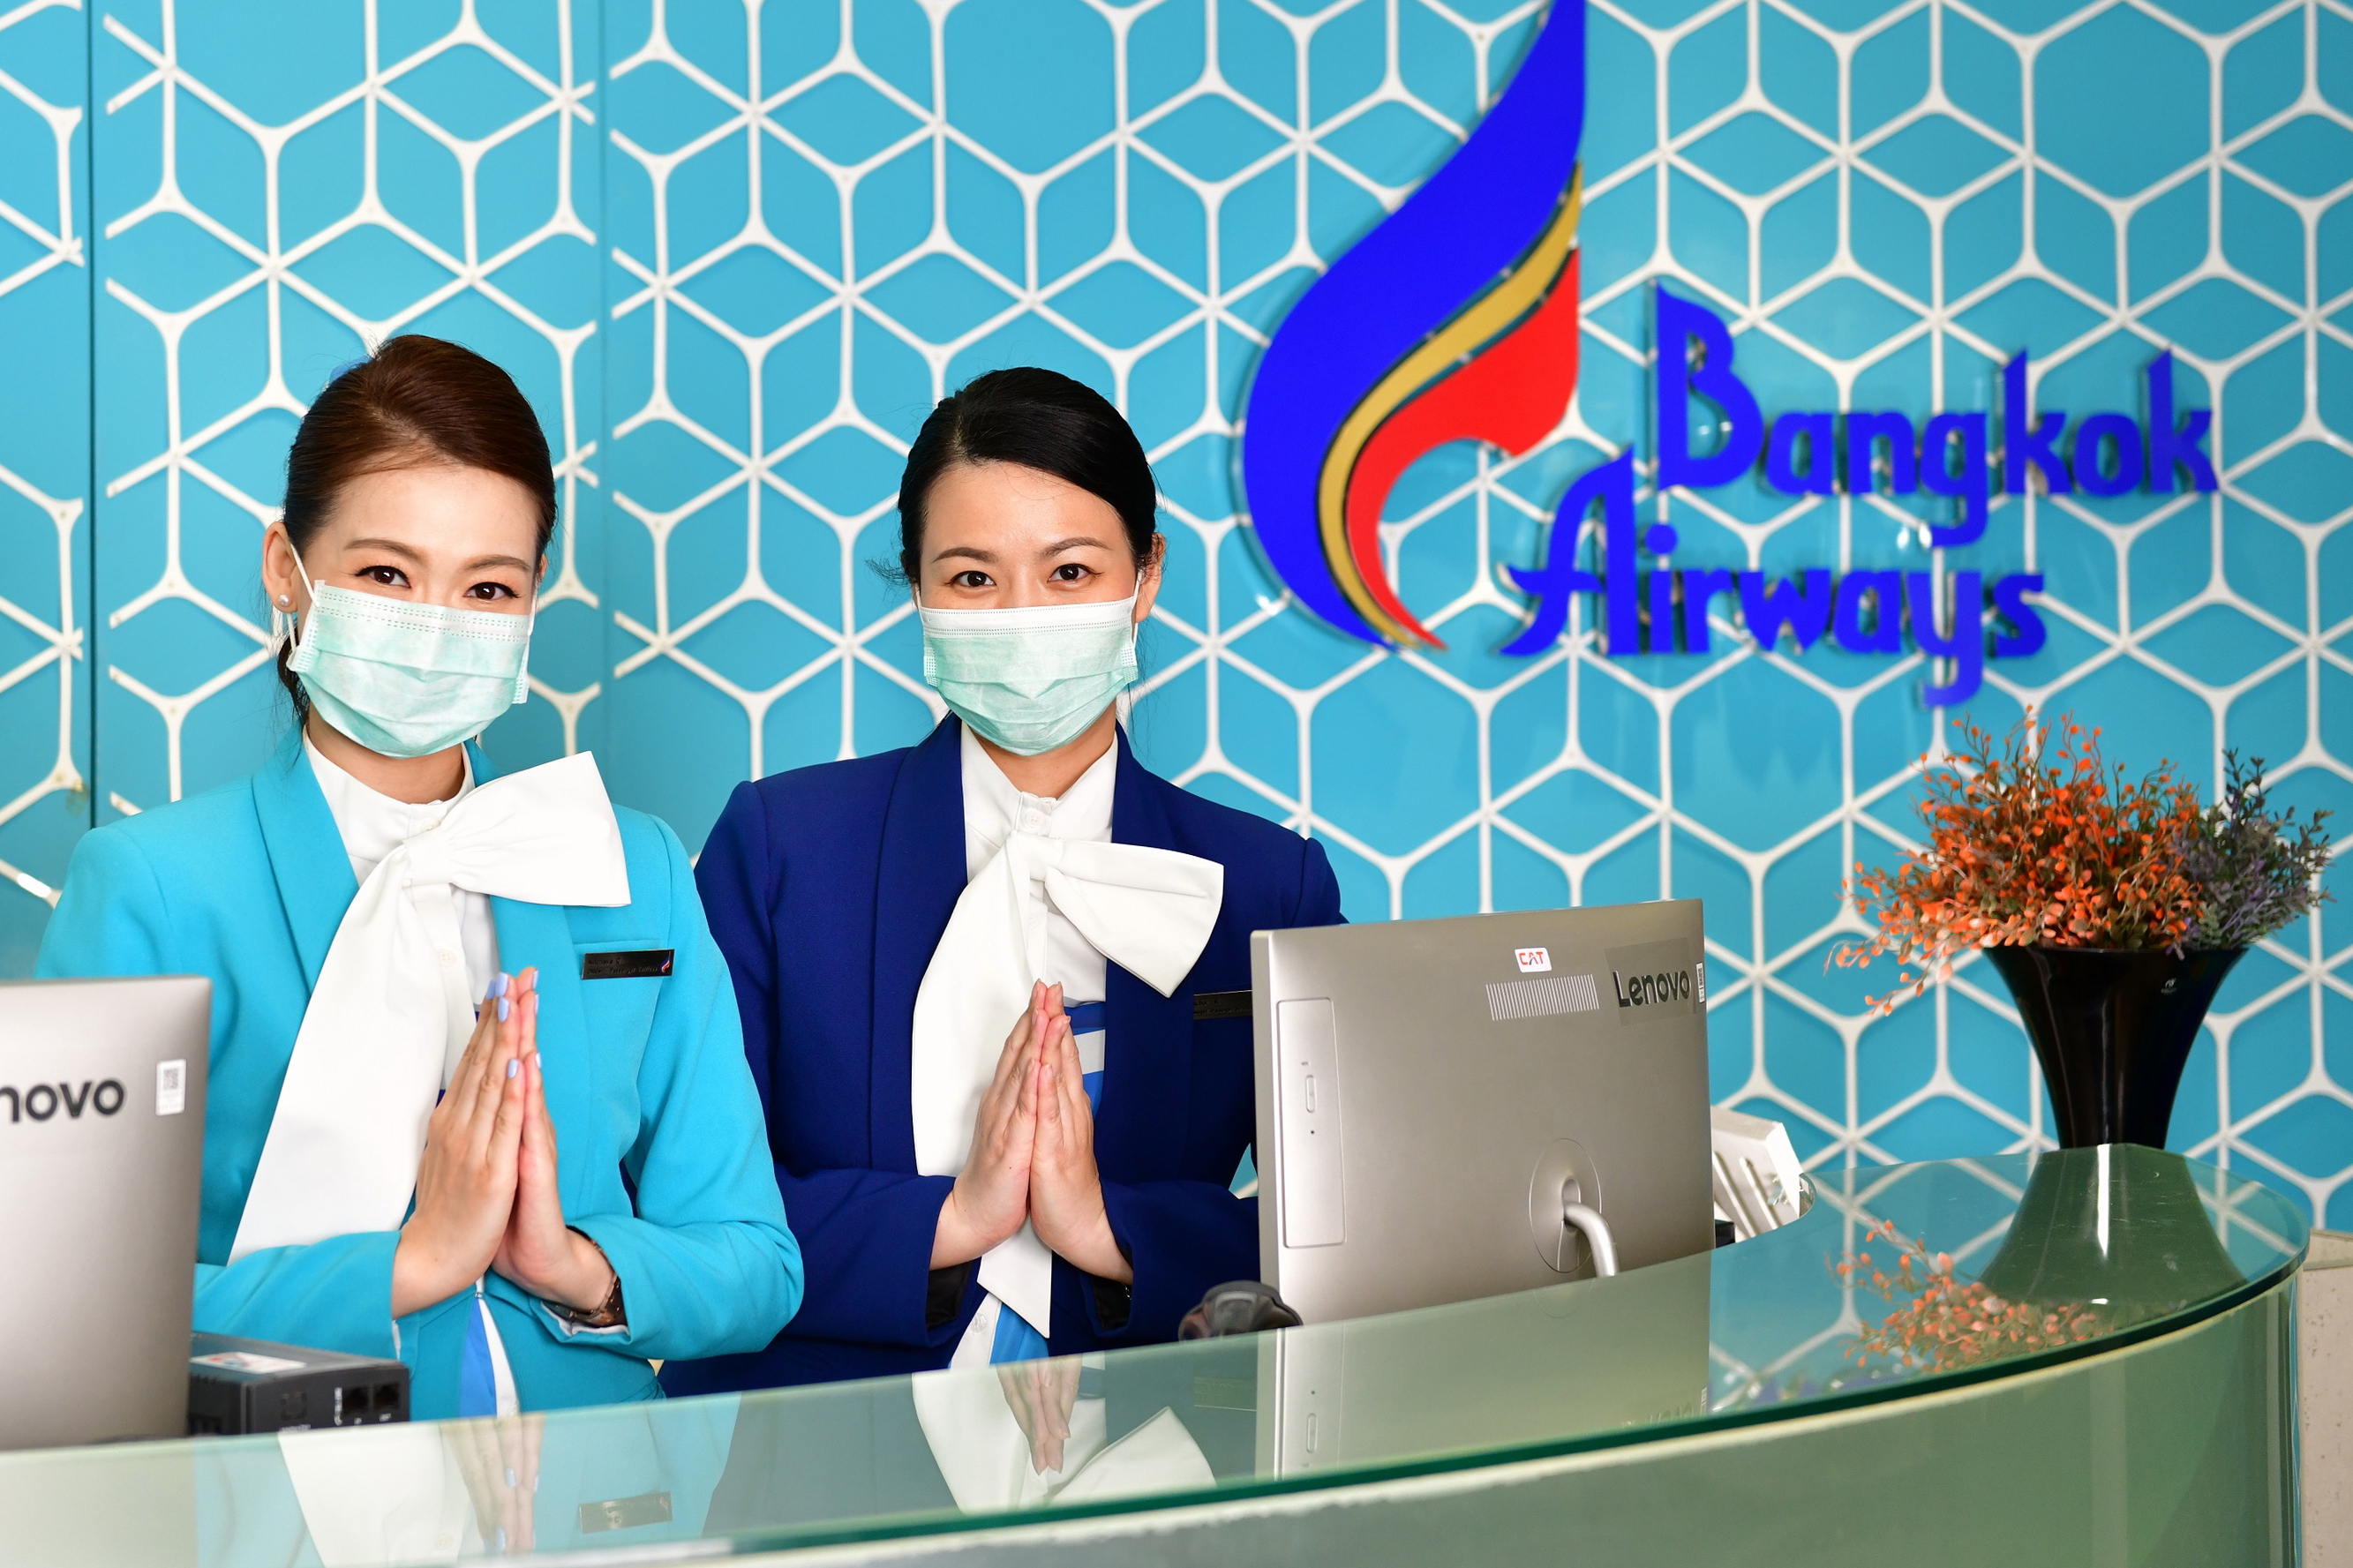 Bangkok Airways has confirmed that it will reopen its passenger lounges at Suvarnabhumi Airport and Samui Airport on 1 August 2020. The airline's passenger lounges at other airports will remain temporarily closed until further notice. Click to enlarge.